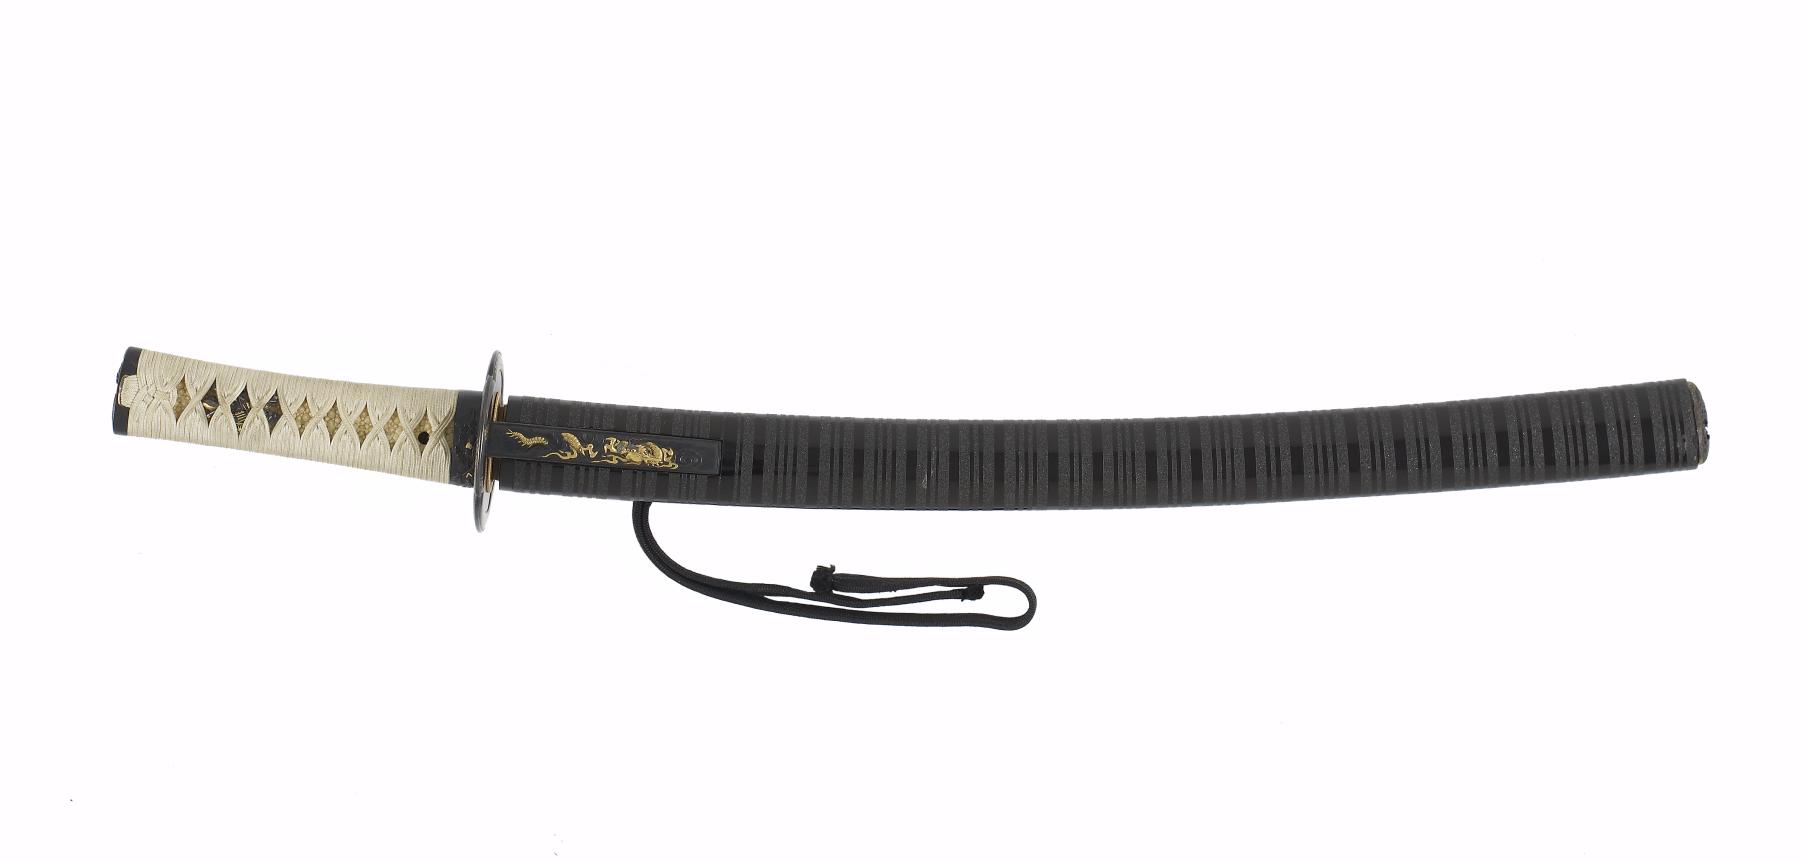 Image for Short sword (wakizashi) with black lacquer saya with inlaid bands of shell dust (includes 51.1215.1-51.1215.5)